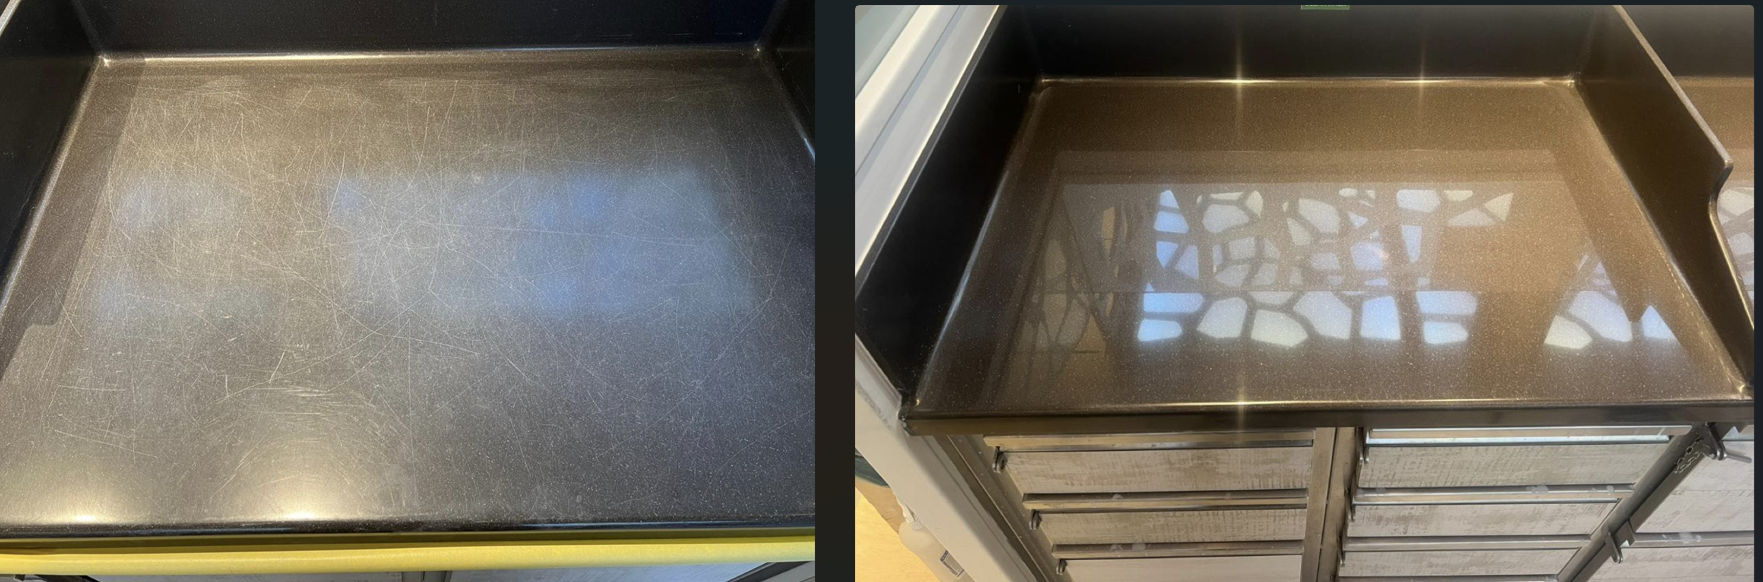 countertops before and after repairs